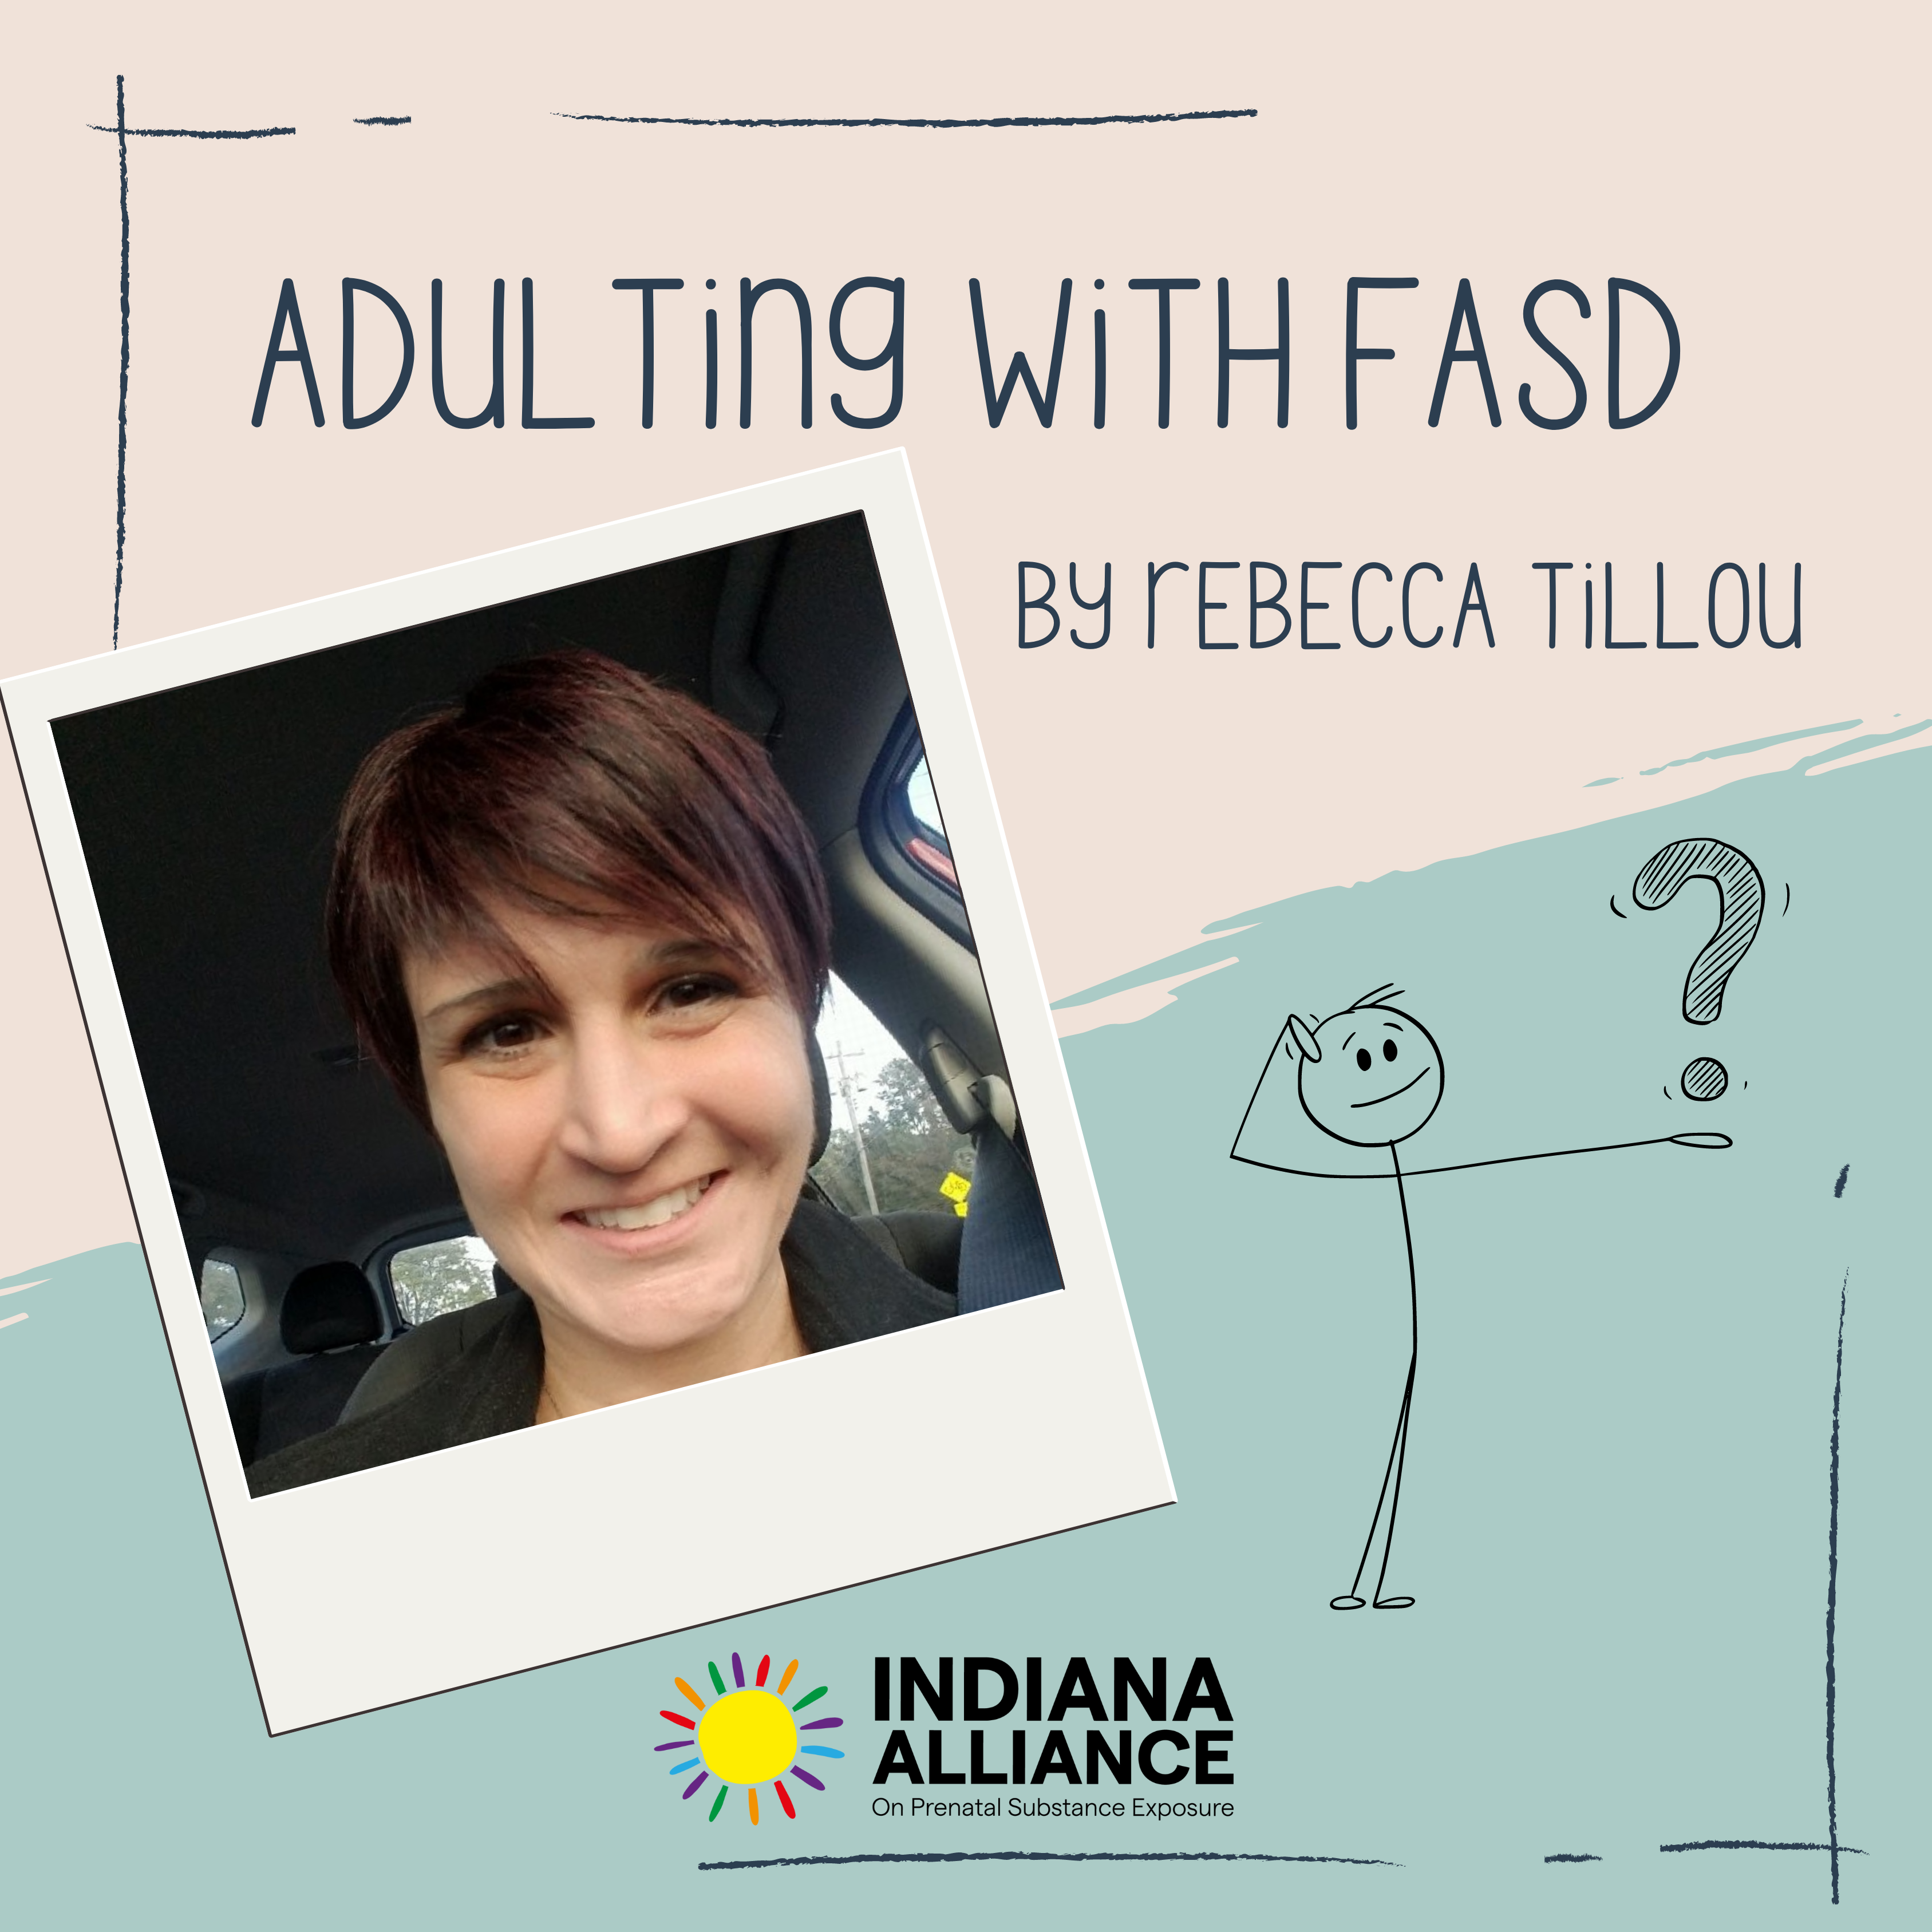 Words Adulting with FASD by Rebecca Tillou. Photo of Rebecca and logo of Indiana Alliance